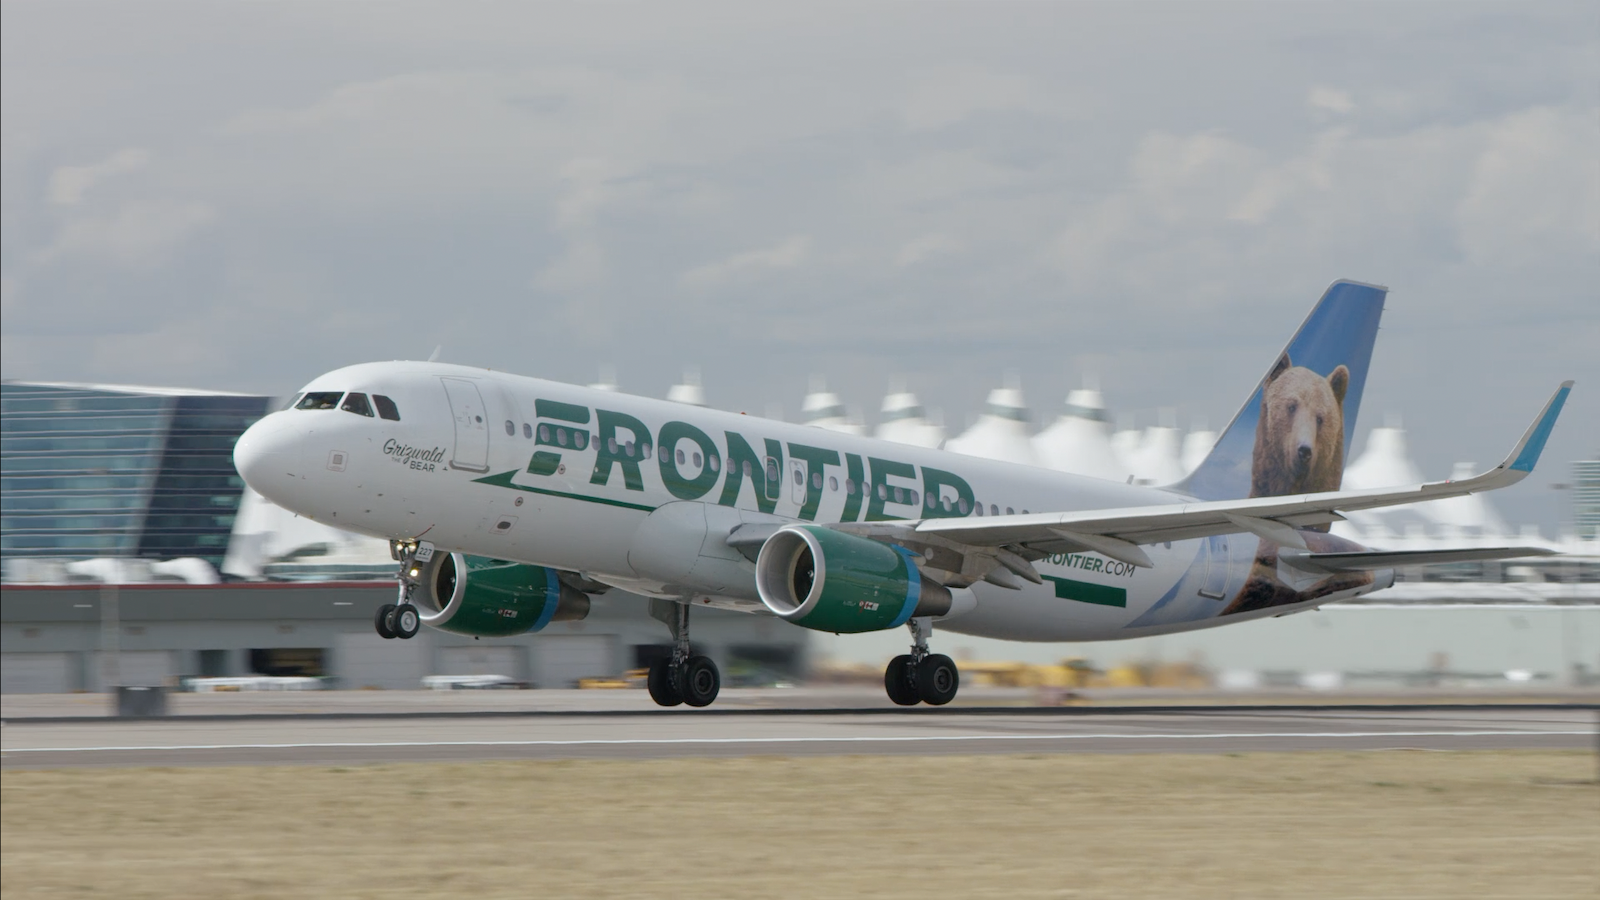 Frontier-jet-takeoff